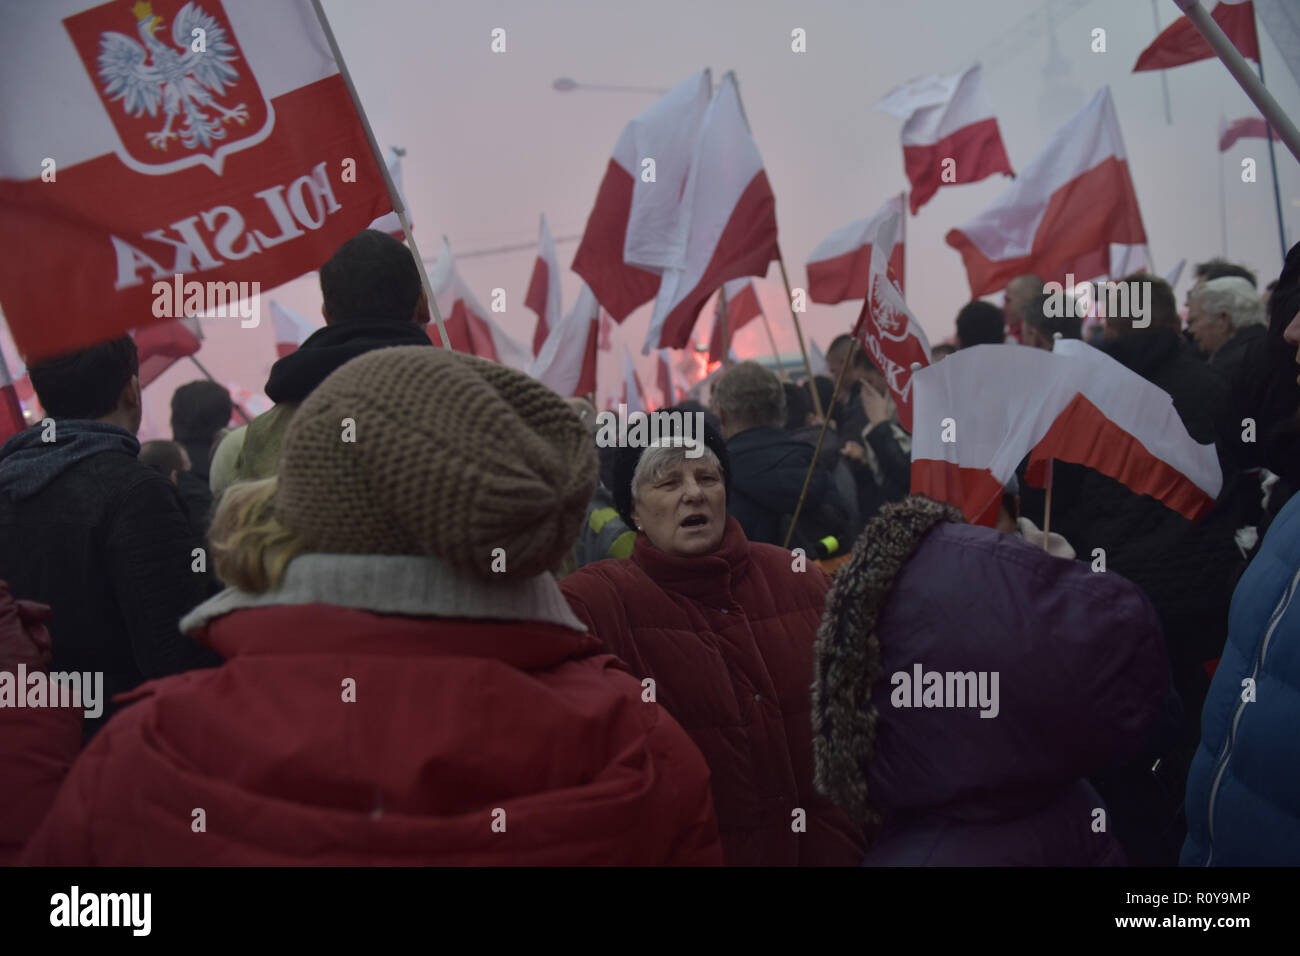 November 11, 2017 - Warsaw, mazowieckie, Poland - Nationalists seen waving flags on the Independence Day during the demonstration.Last year about 60,000 people took part in the nationalist march marking Poland's Independence Day, according to police figures. The march has taken place each year on November 11th for almost a decade, and has grown to draw tens of thousands of participants, including extremists from across the EU.Warsaw's mayor Hanna Gronkiewicz-Waltz has banned the event. Organizers said they would appeal against the decision, insisting they would go ahead with the march an Stock Photo